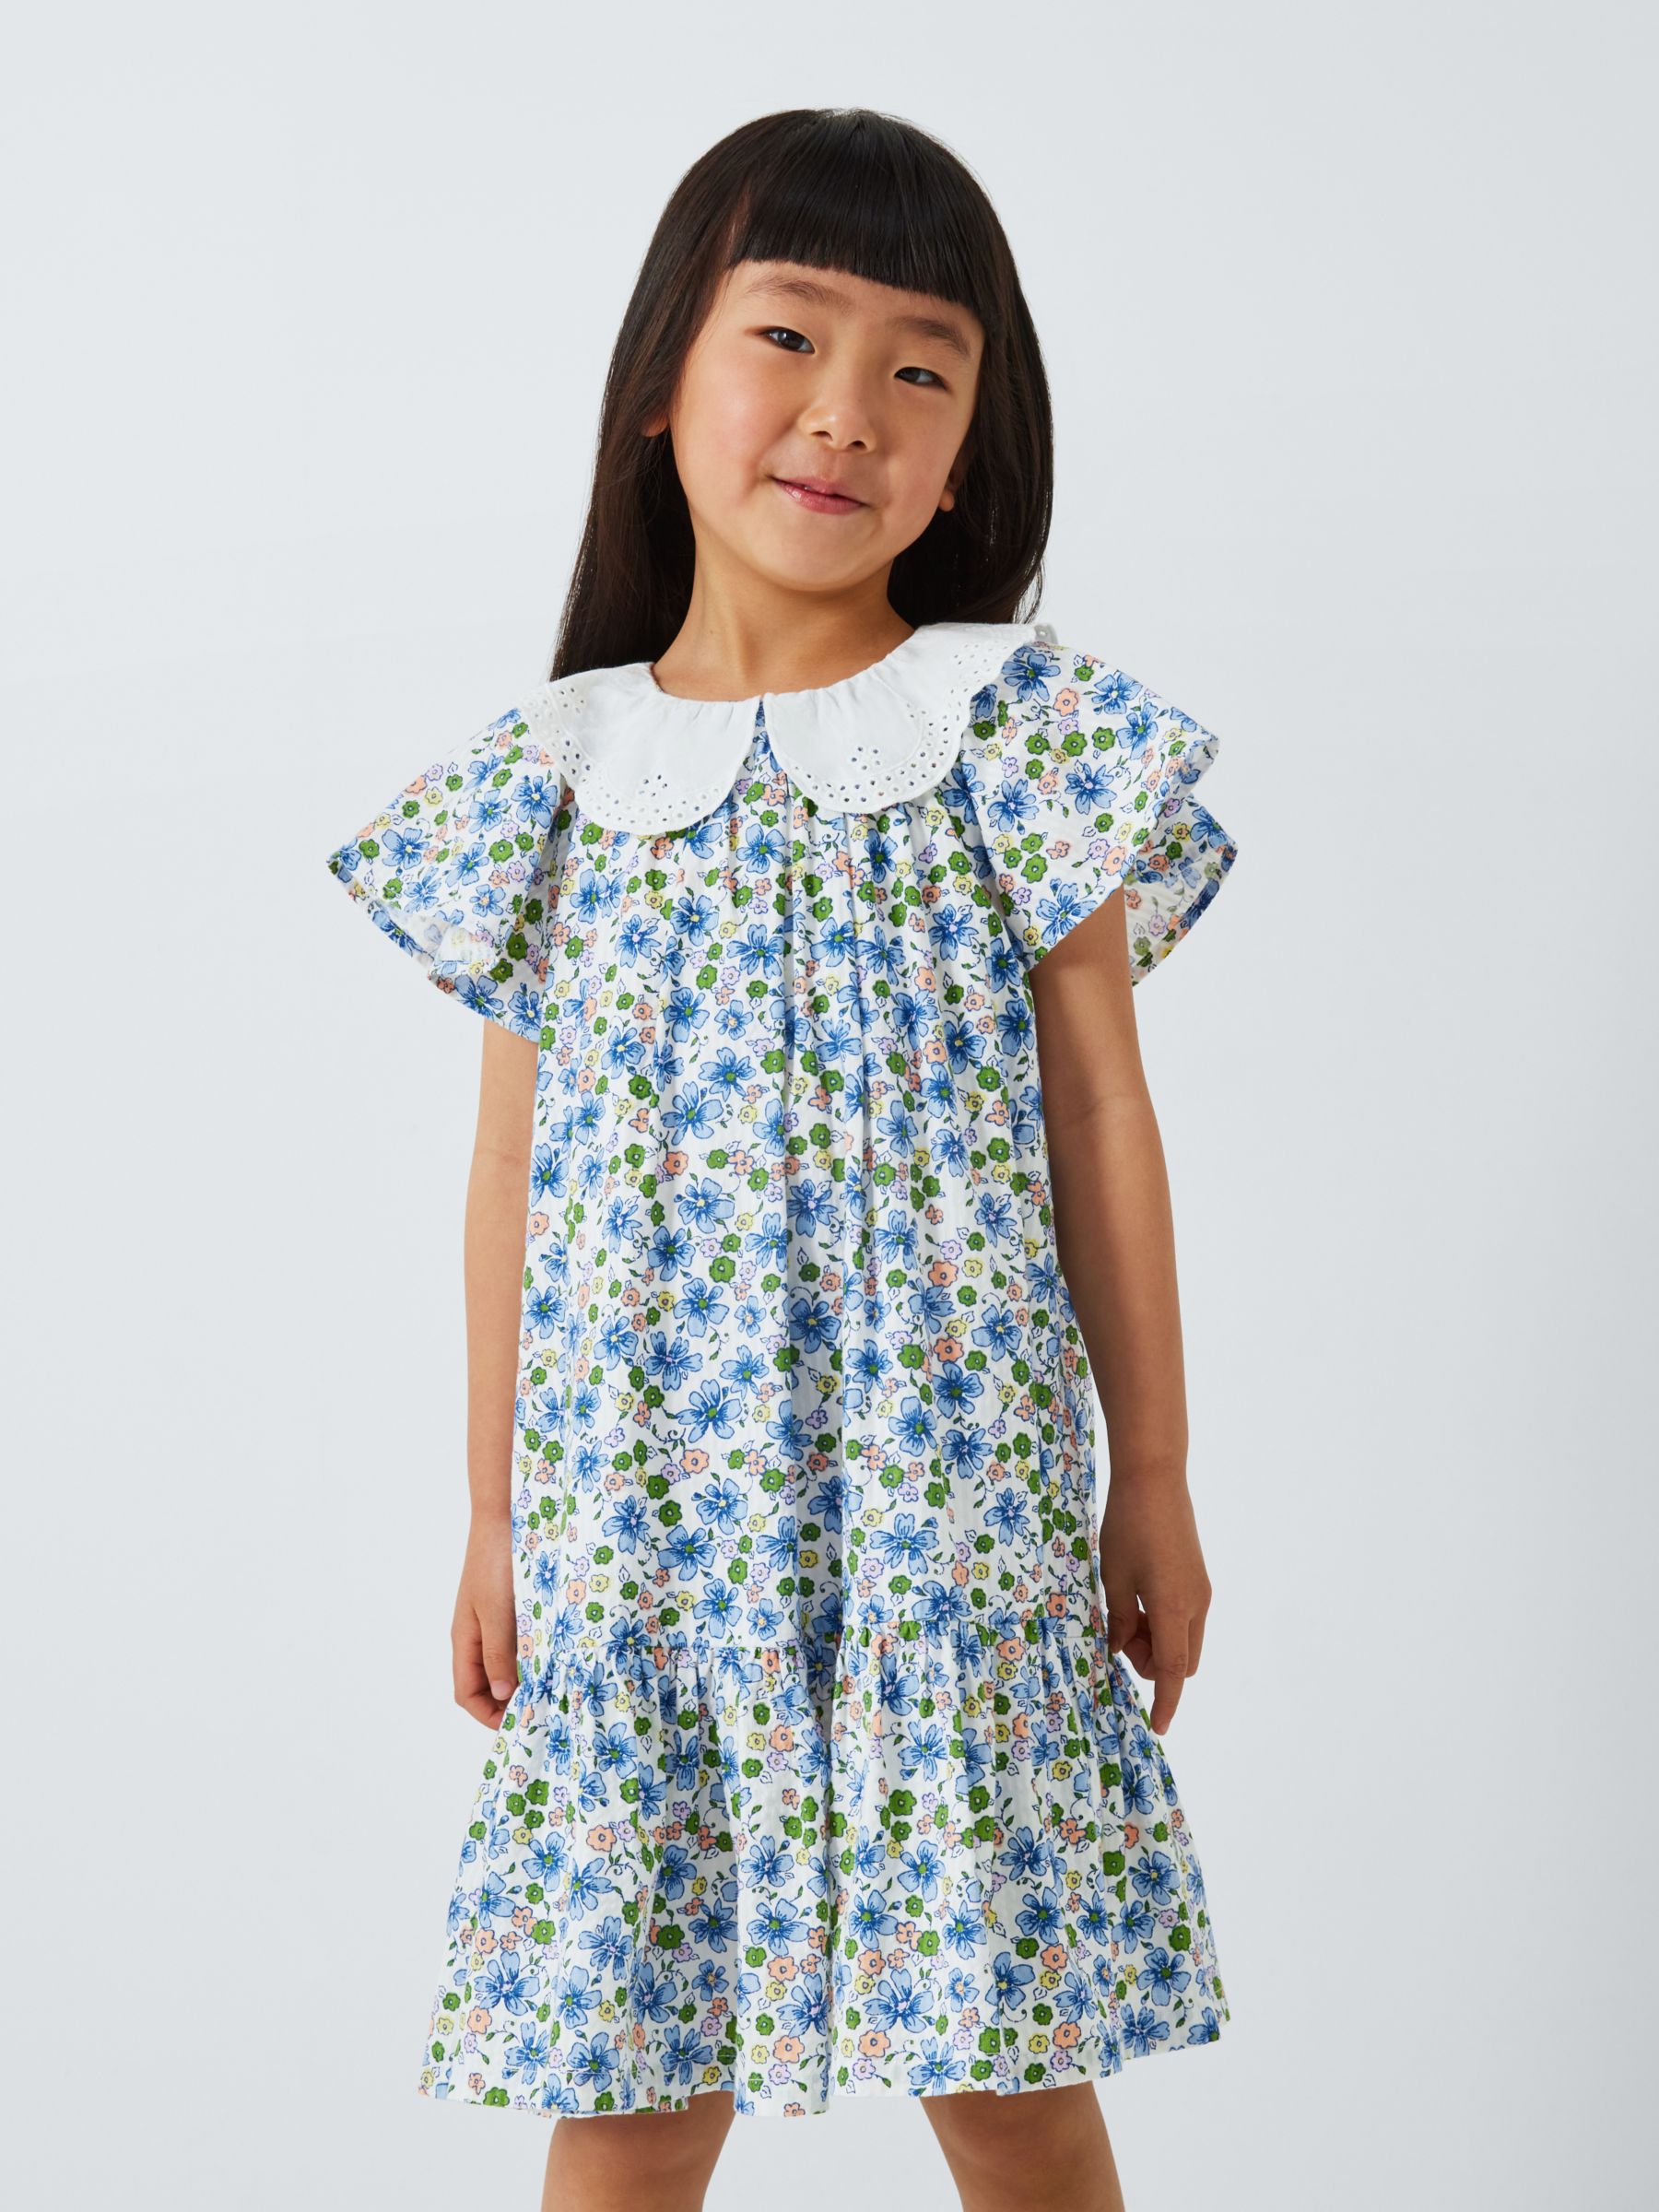 John Lewis Kids' Floral Broderie Anglaise Collar Dress, Multi, 4 years